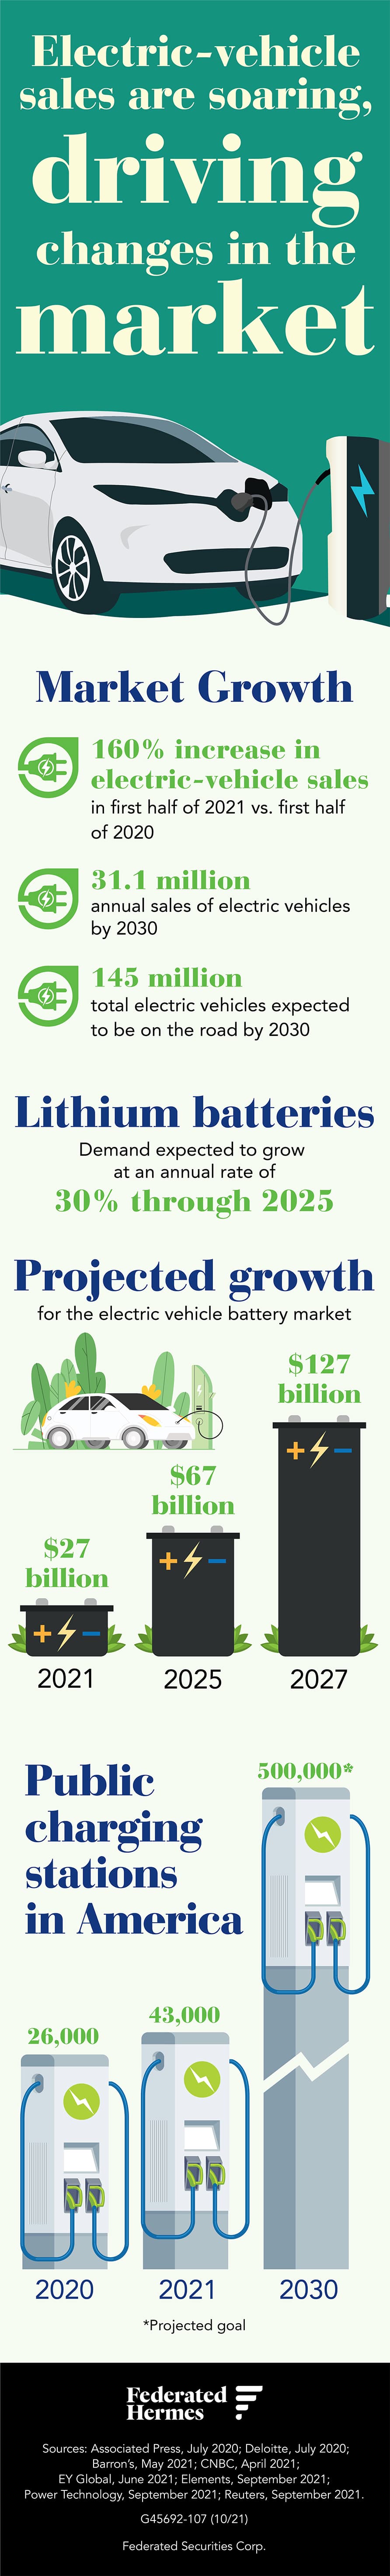 Electric Vehicle Infographic alt text Title: Electric-Vehicle sales are soaring, driving changes in the market Published: October 21, 2021 Electric-vehicle sales are soaring, driving changes in the market. Market Growth. There was a 160 percent increase in electric-vehicle sales in the first half of 2021 versus the first half in 2020. 31.1 million in annual sales is expected by 2030. 145 million total electric vehicles are expected to be on the road by 2030. Lithium batteries demand are expected to grow at an annual rate of 30 percent through 2025. Projected growth for electric vehicle battery market. $27 billion in 2021. $67 billion in 2025. $127 billion in 2027. Public charging stations in America. There were 26,000 charging stations in 2020. 43,000 charging stations in 2021. 500,000* is the projected goal for 2030. *projected goal Information Sources: Associated Press, July 2020; Deloitte, July 2020; Barron’s, May 2021; CNBC, April 2021; EY Global, June 2021; Elements, September 2021; Power Technology, September 2021; Reuters, September 2021.